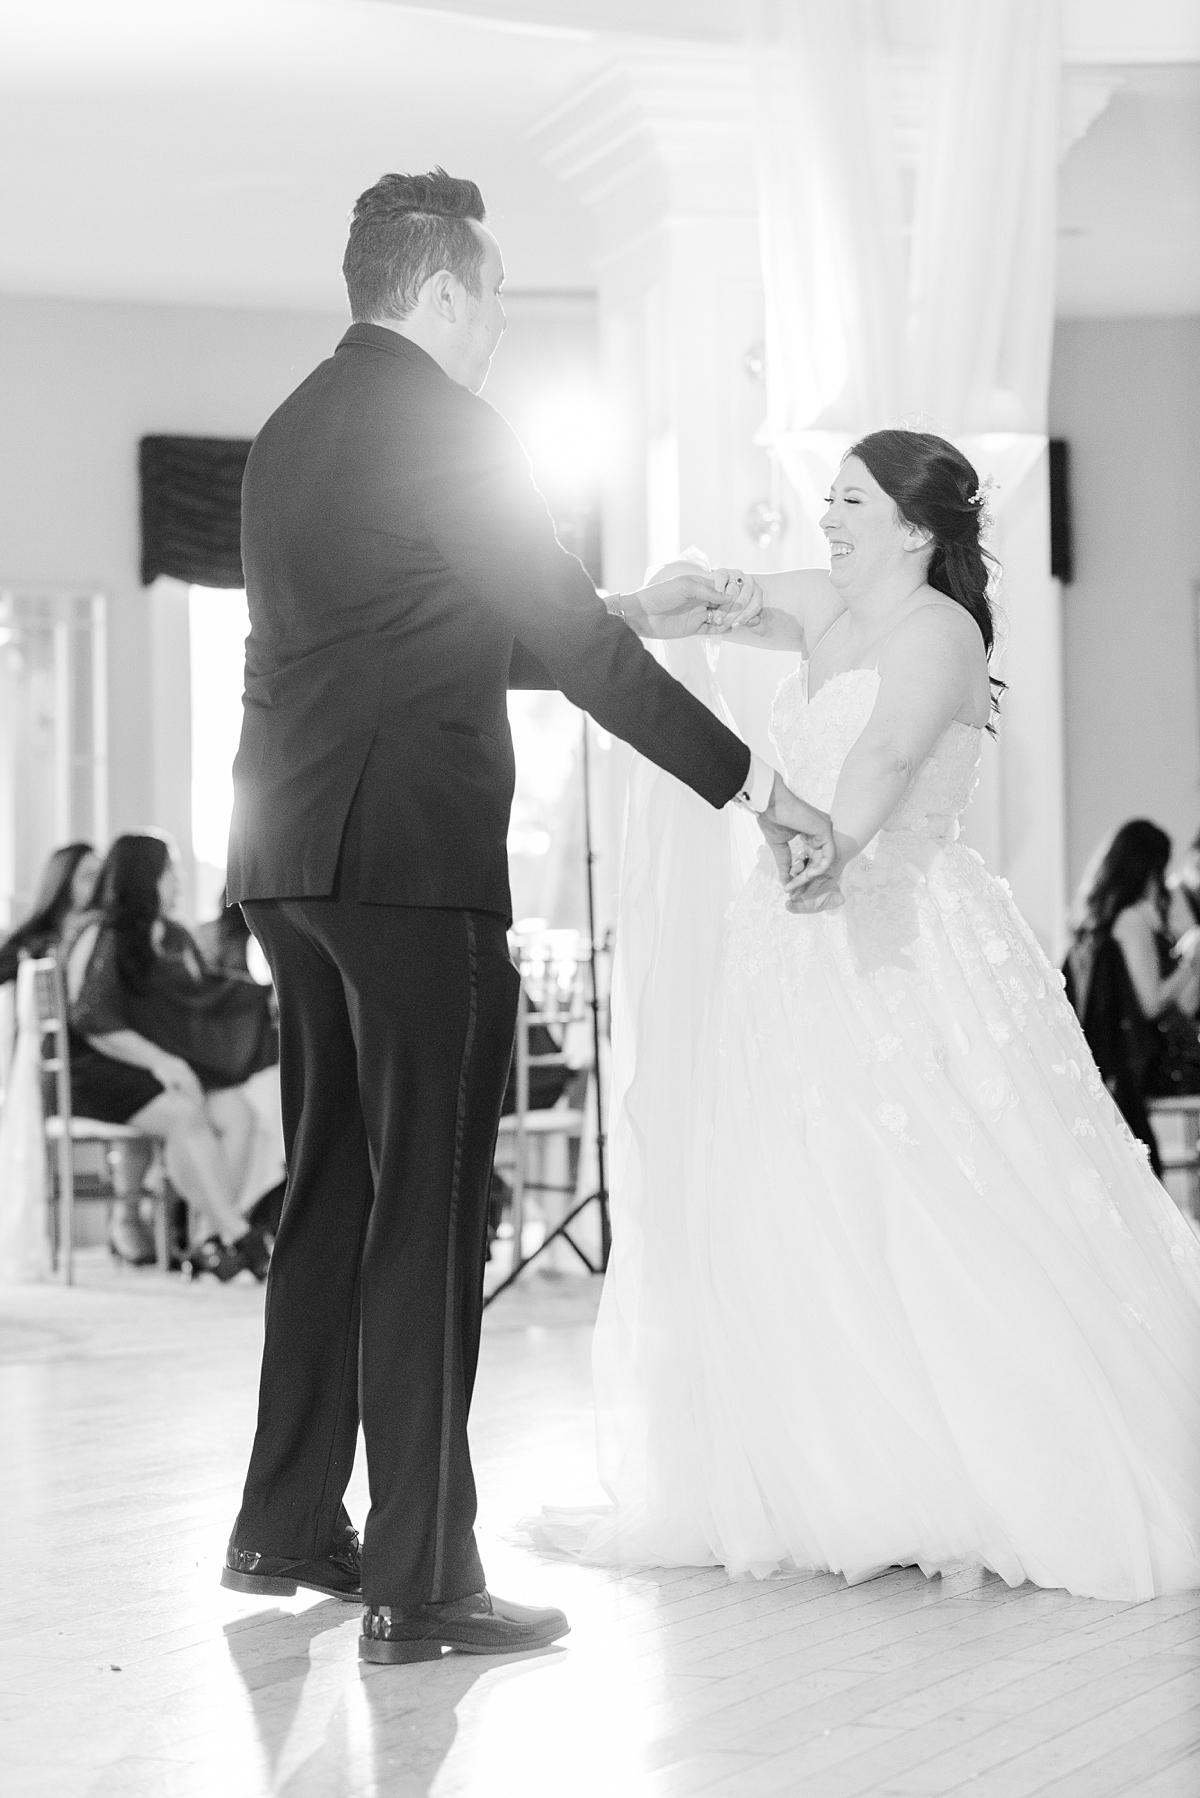 Bride and Groom First Dance at Dominion Club Fall Wedding Reception. Wedding Photography by Virginia Wedding Photographer Kailey Brianne Photography.